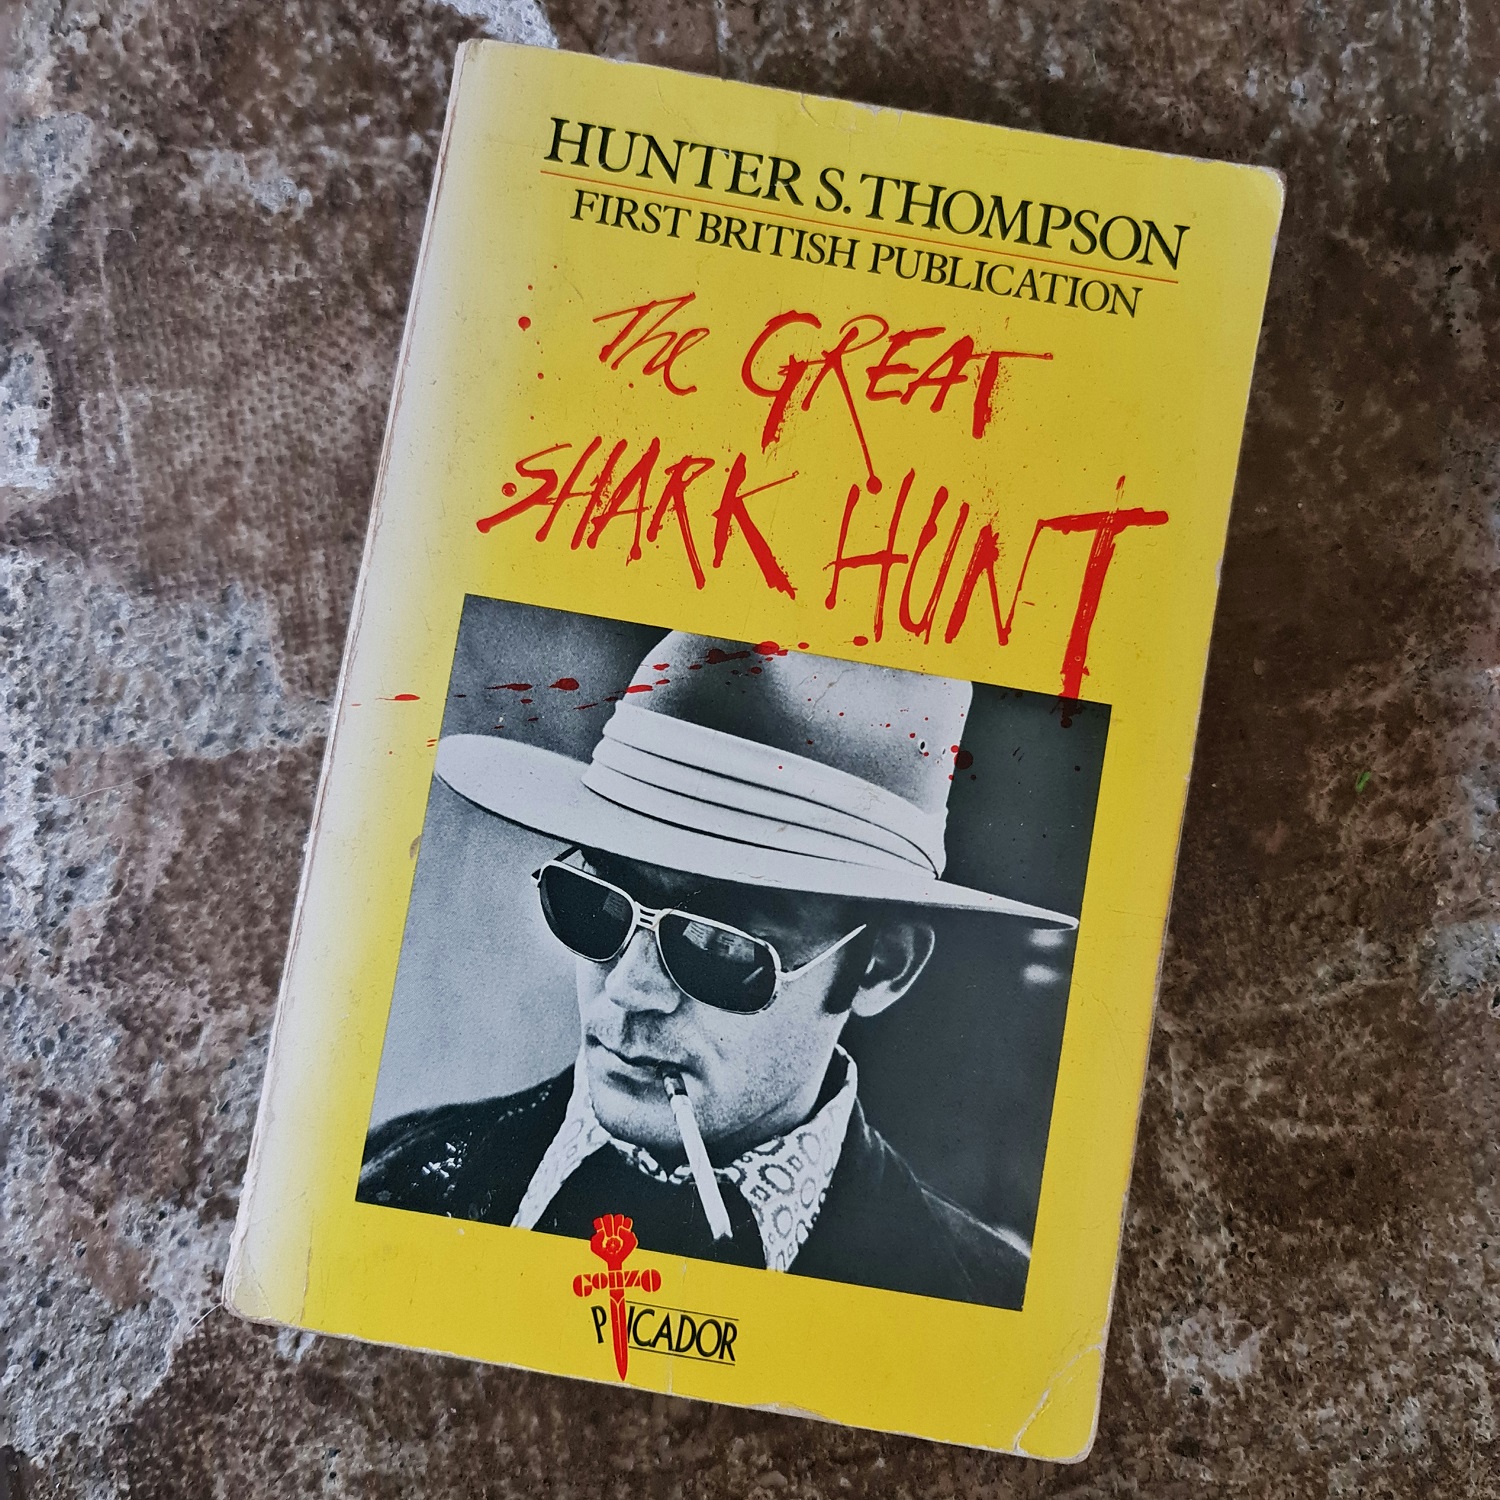 the great shark hunt by hunter s thompson